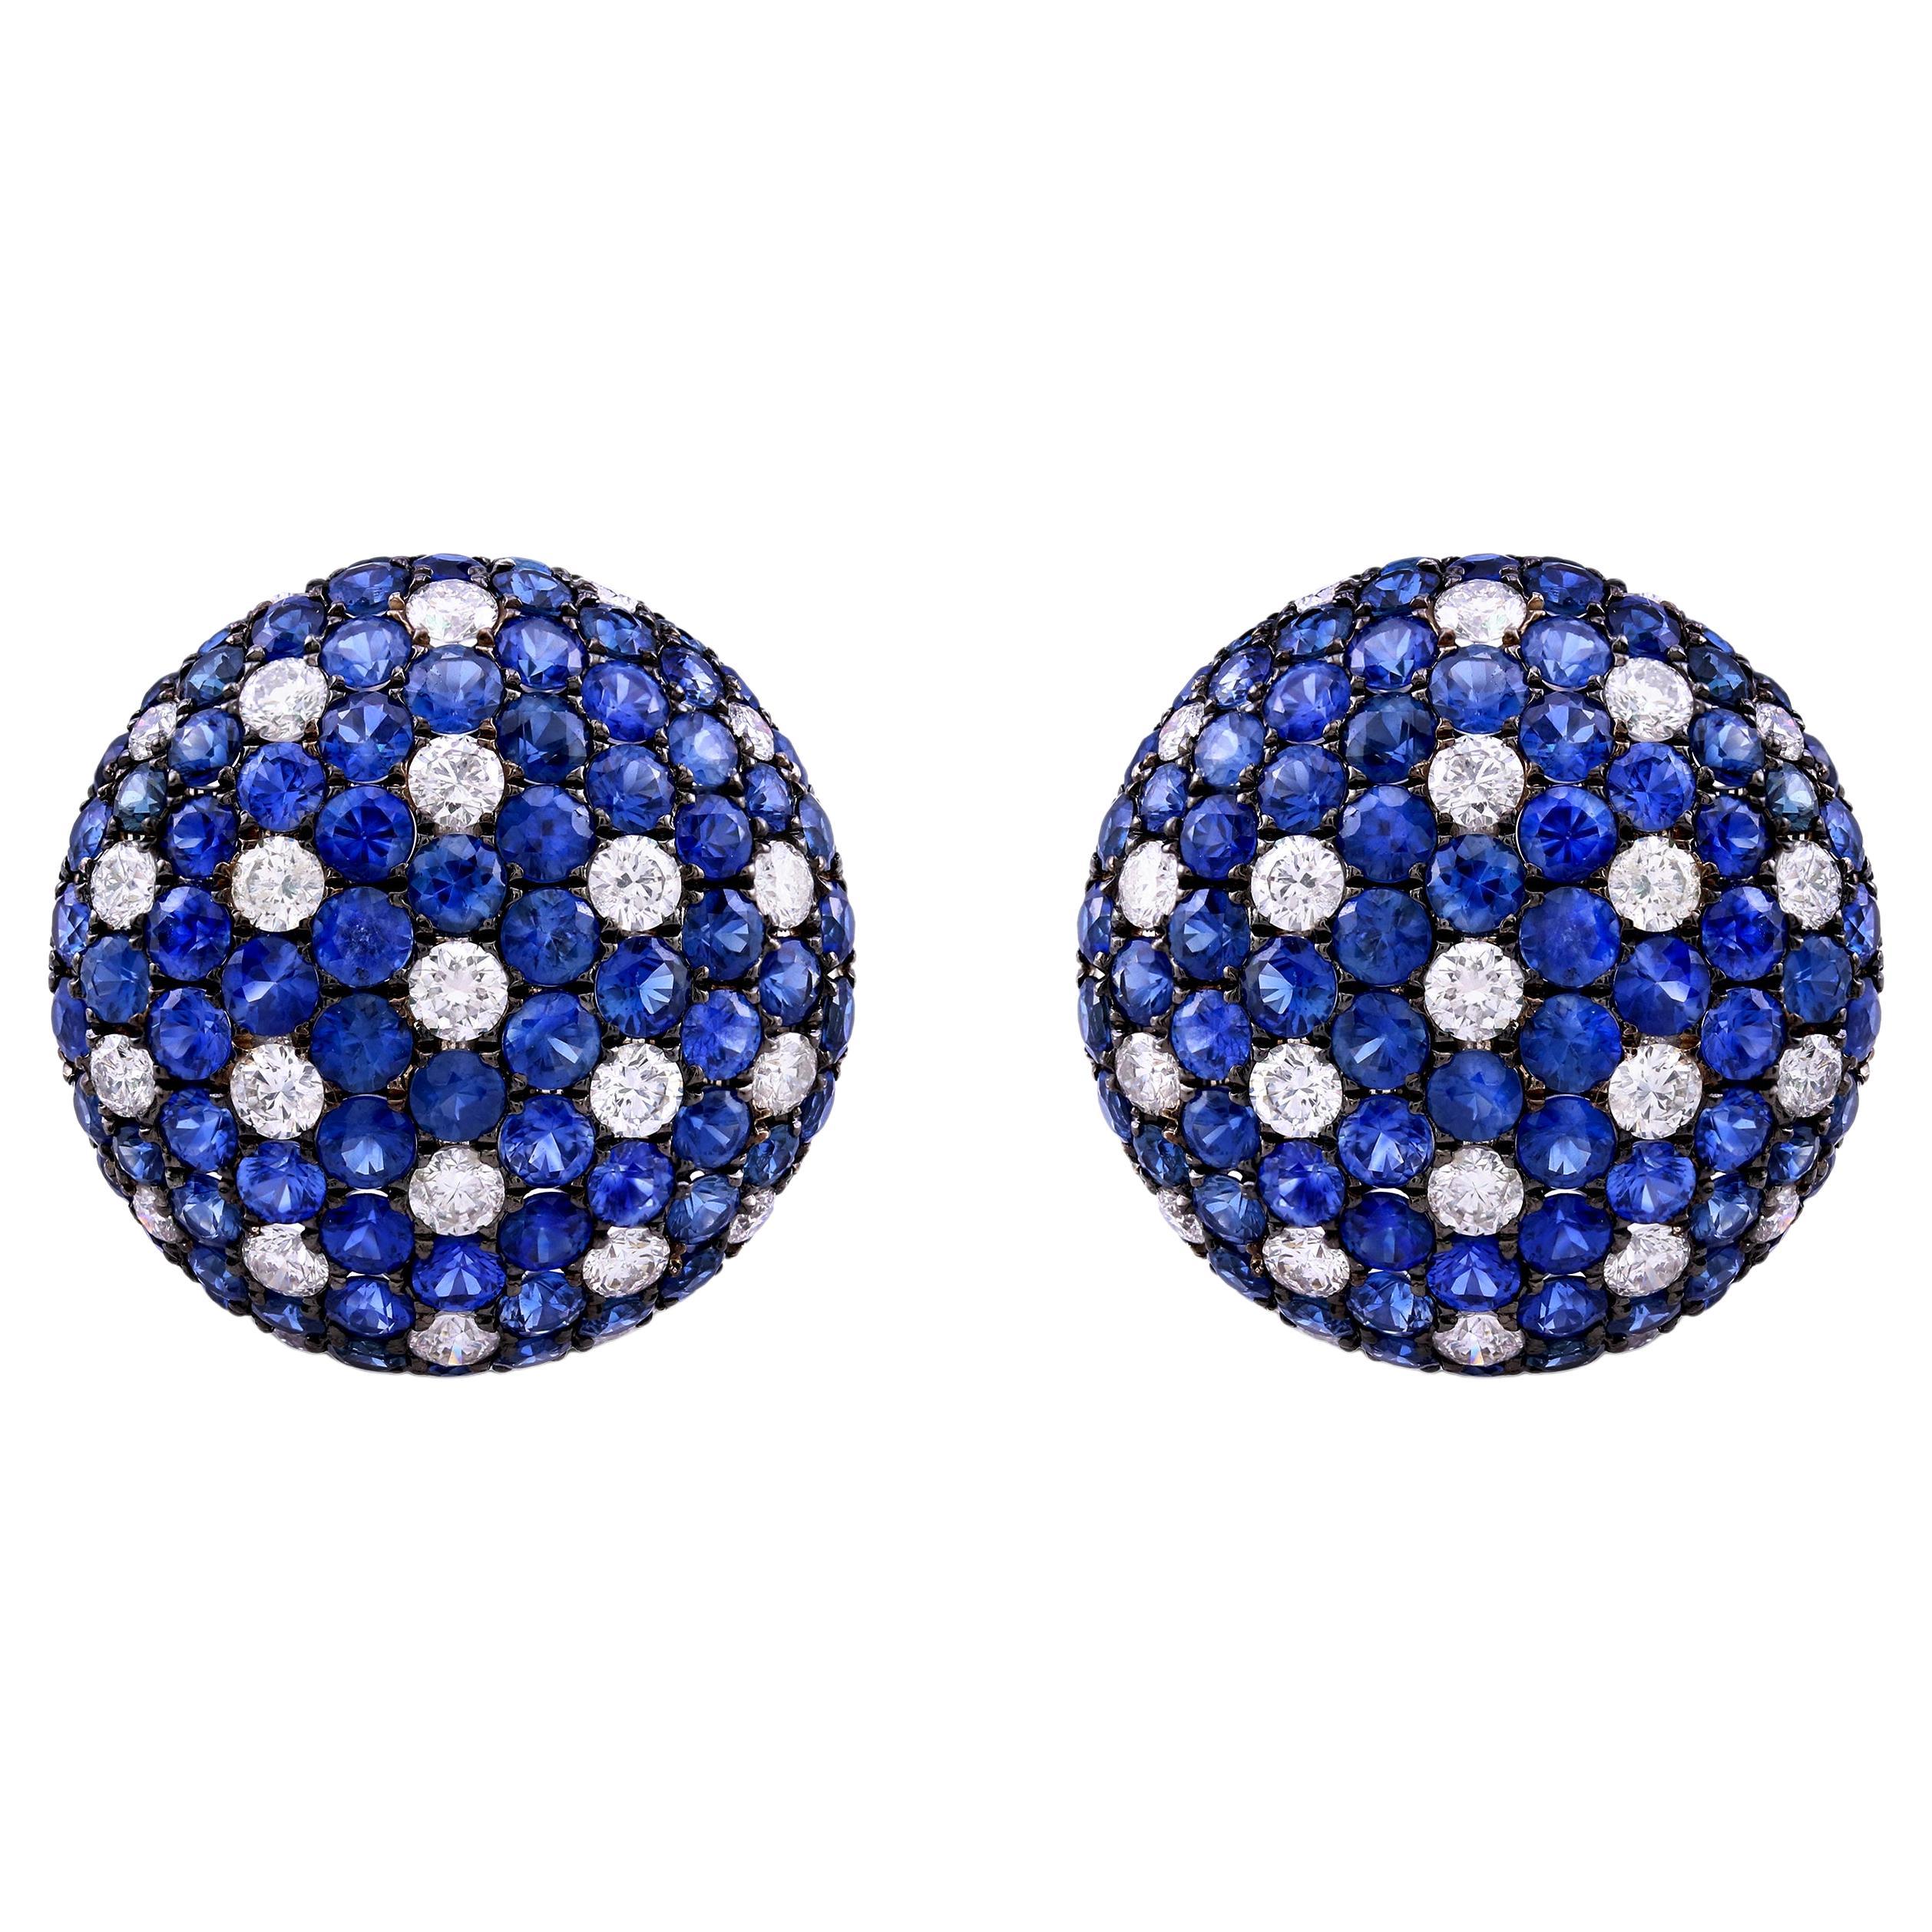 Nigaam 9.85 Cttw. Blue Sapphire and Diamond Stud Earrings in 18k White Gold For Sale